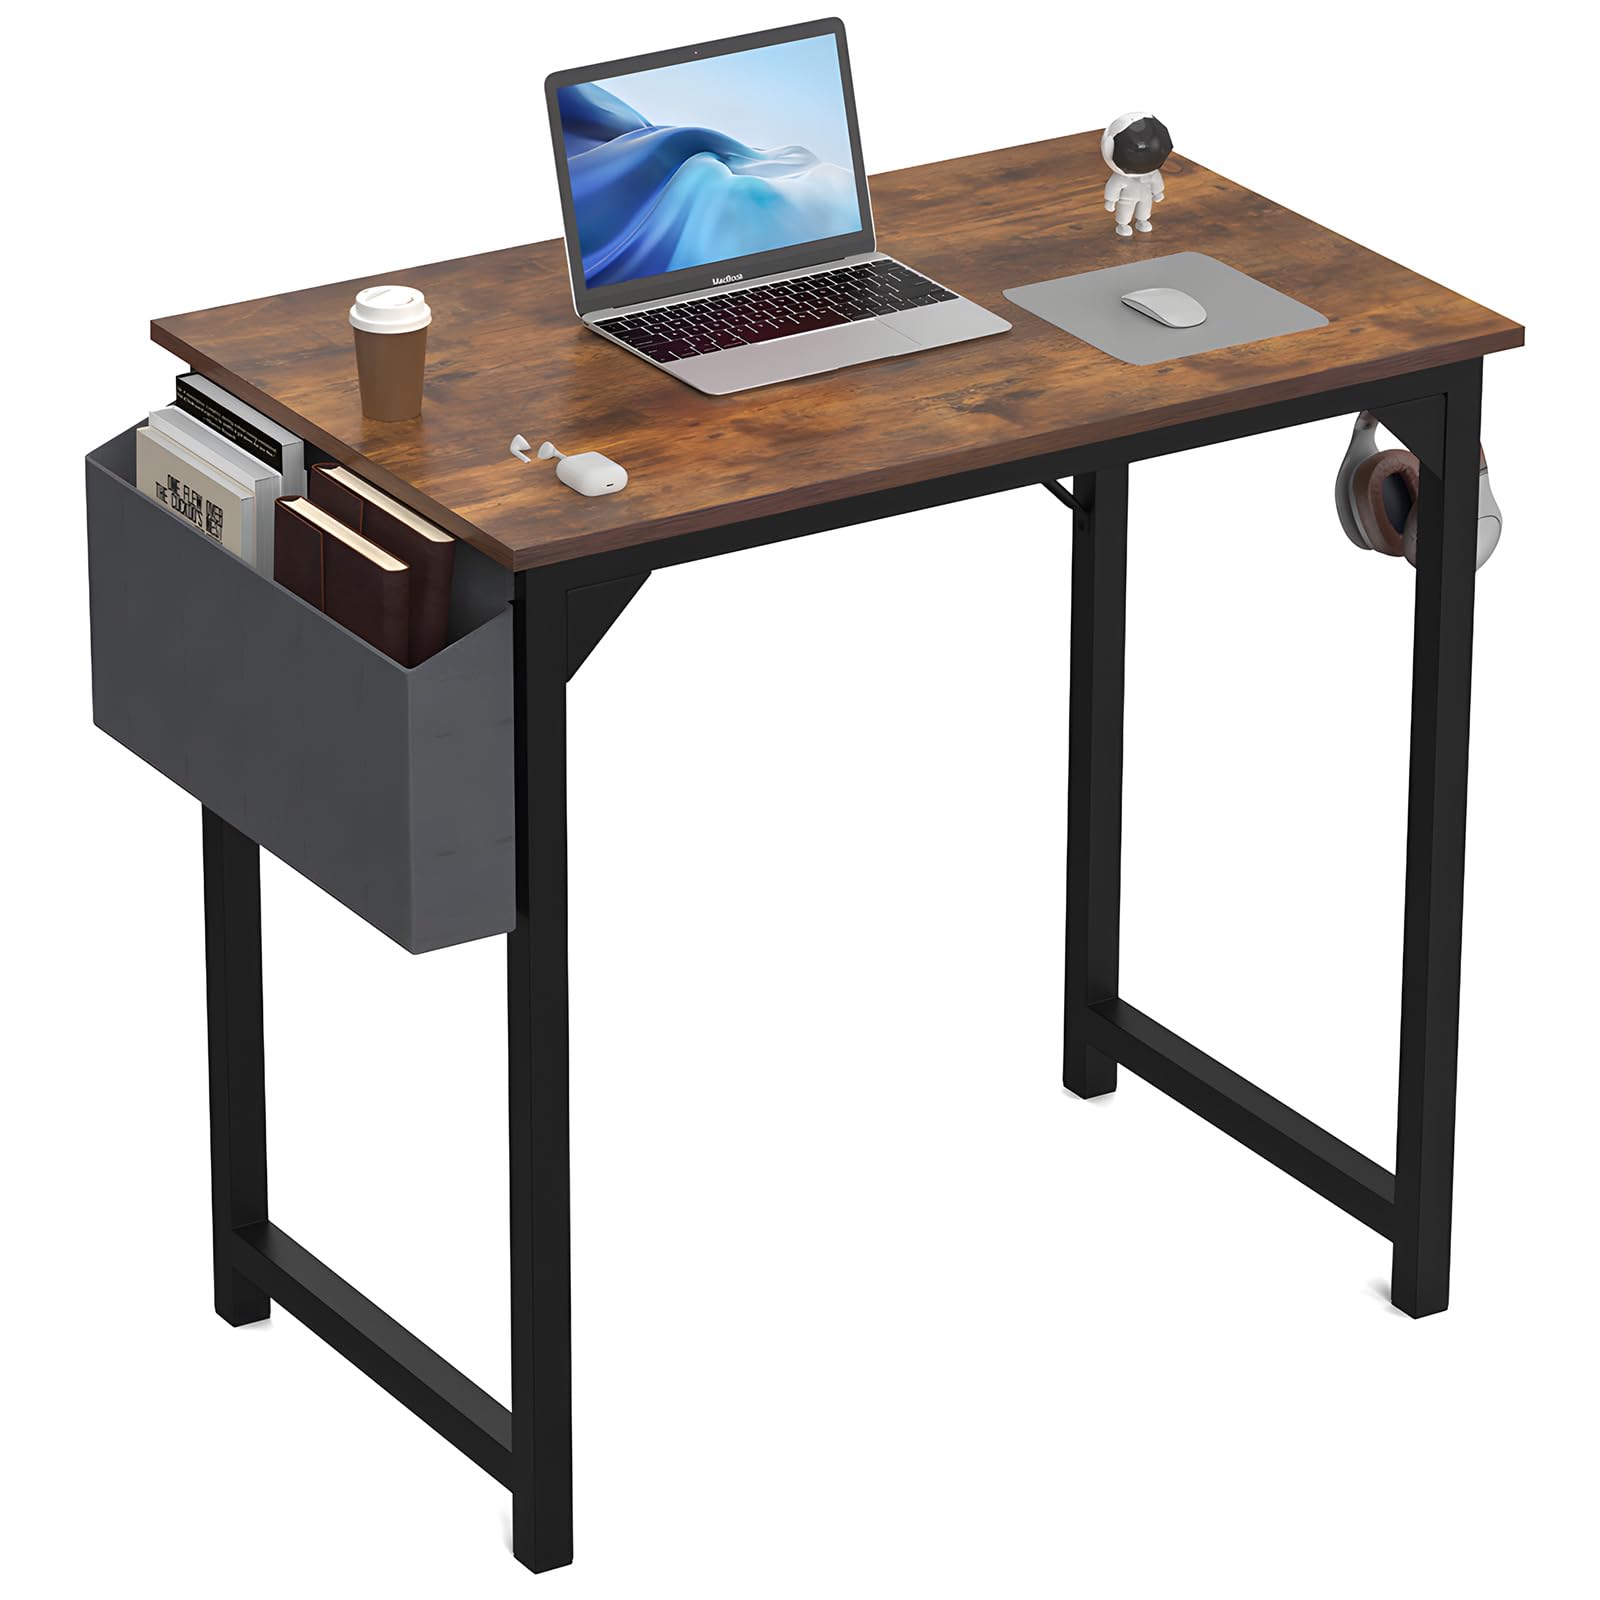 ANTONIA Computer Desk Small, 32 Inch Writing Study Office Gaming Table Modern Simple Style Compact with Side Bag Headphone Hook, Vintage Rustic $28